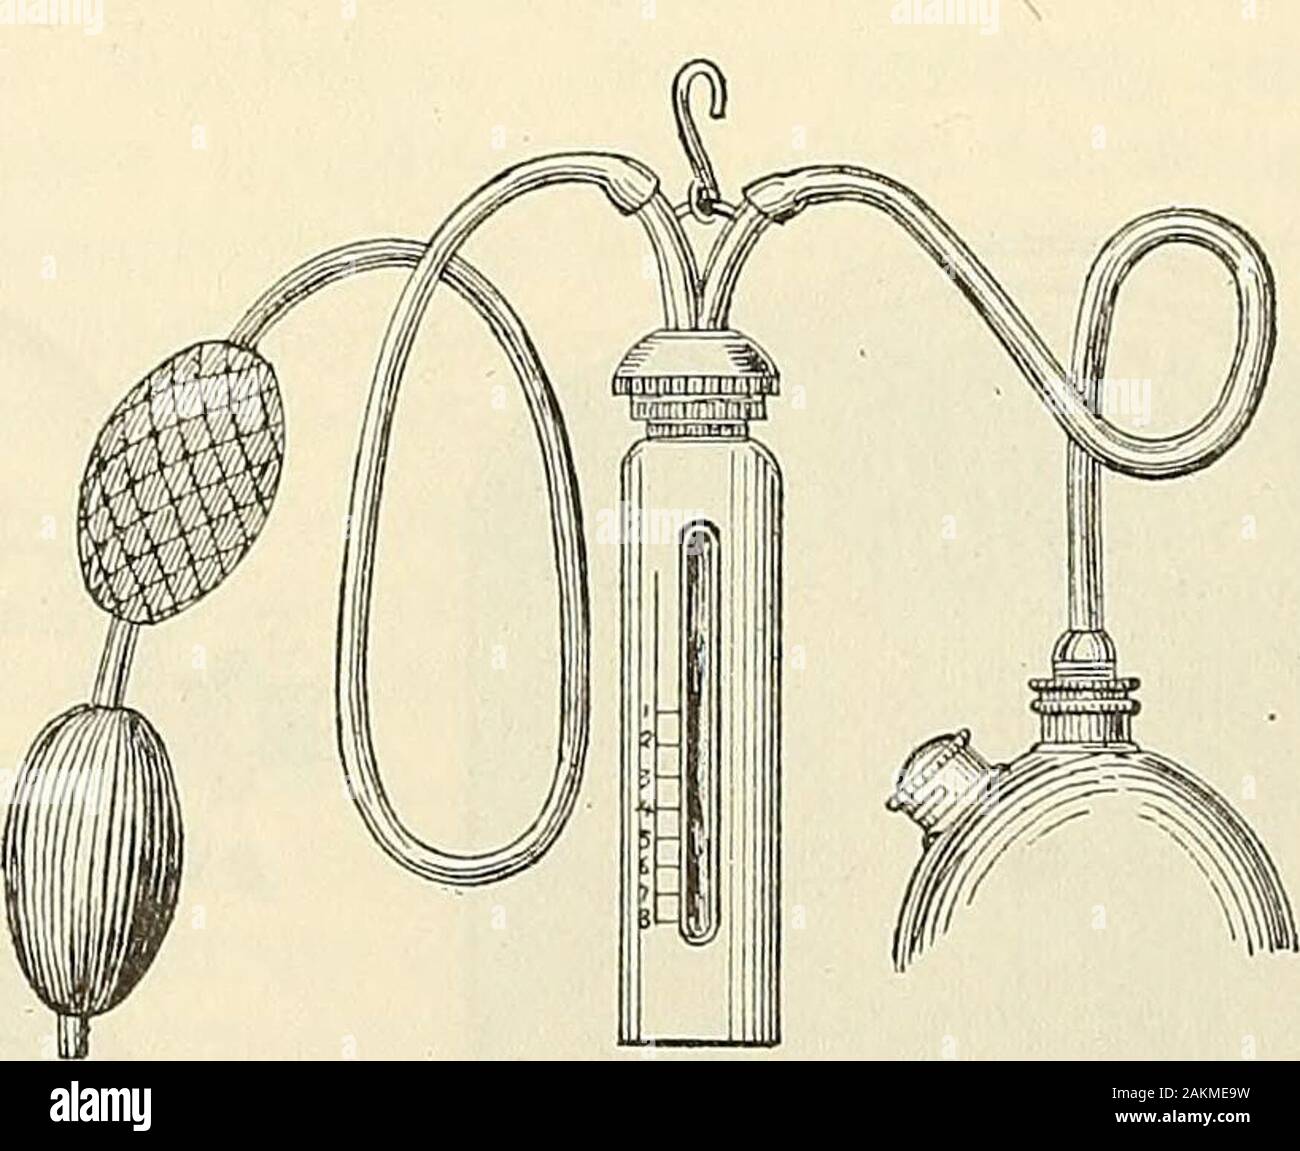 Modern surgery, general and operative . Fig. 791.—Skinners mask. Fig. 792.—Junkers inhaler. and vomiting at this time mean that the vapor is too strong. During thestage of excitement do not suspend the administration of chloroform unlessrespiration becomes difficult, in which case suspend it until the patient takesone or two respirations. If the patient struggles, do not hold him, and pushthe administration of the drug. He holds his breath while struggling, andas struggling ceases takes full, deep breaths. If the inhaler is saturated withchloroform, he may inhale a dangerous amount during the Stock Photo